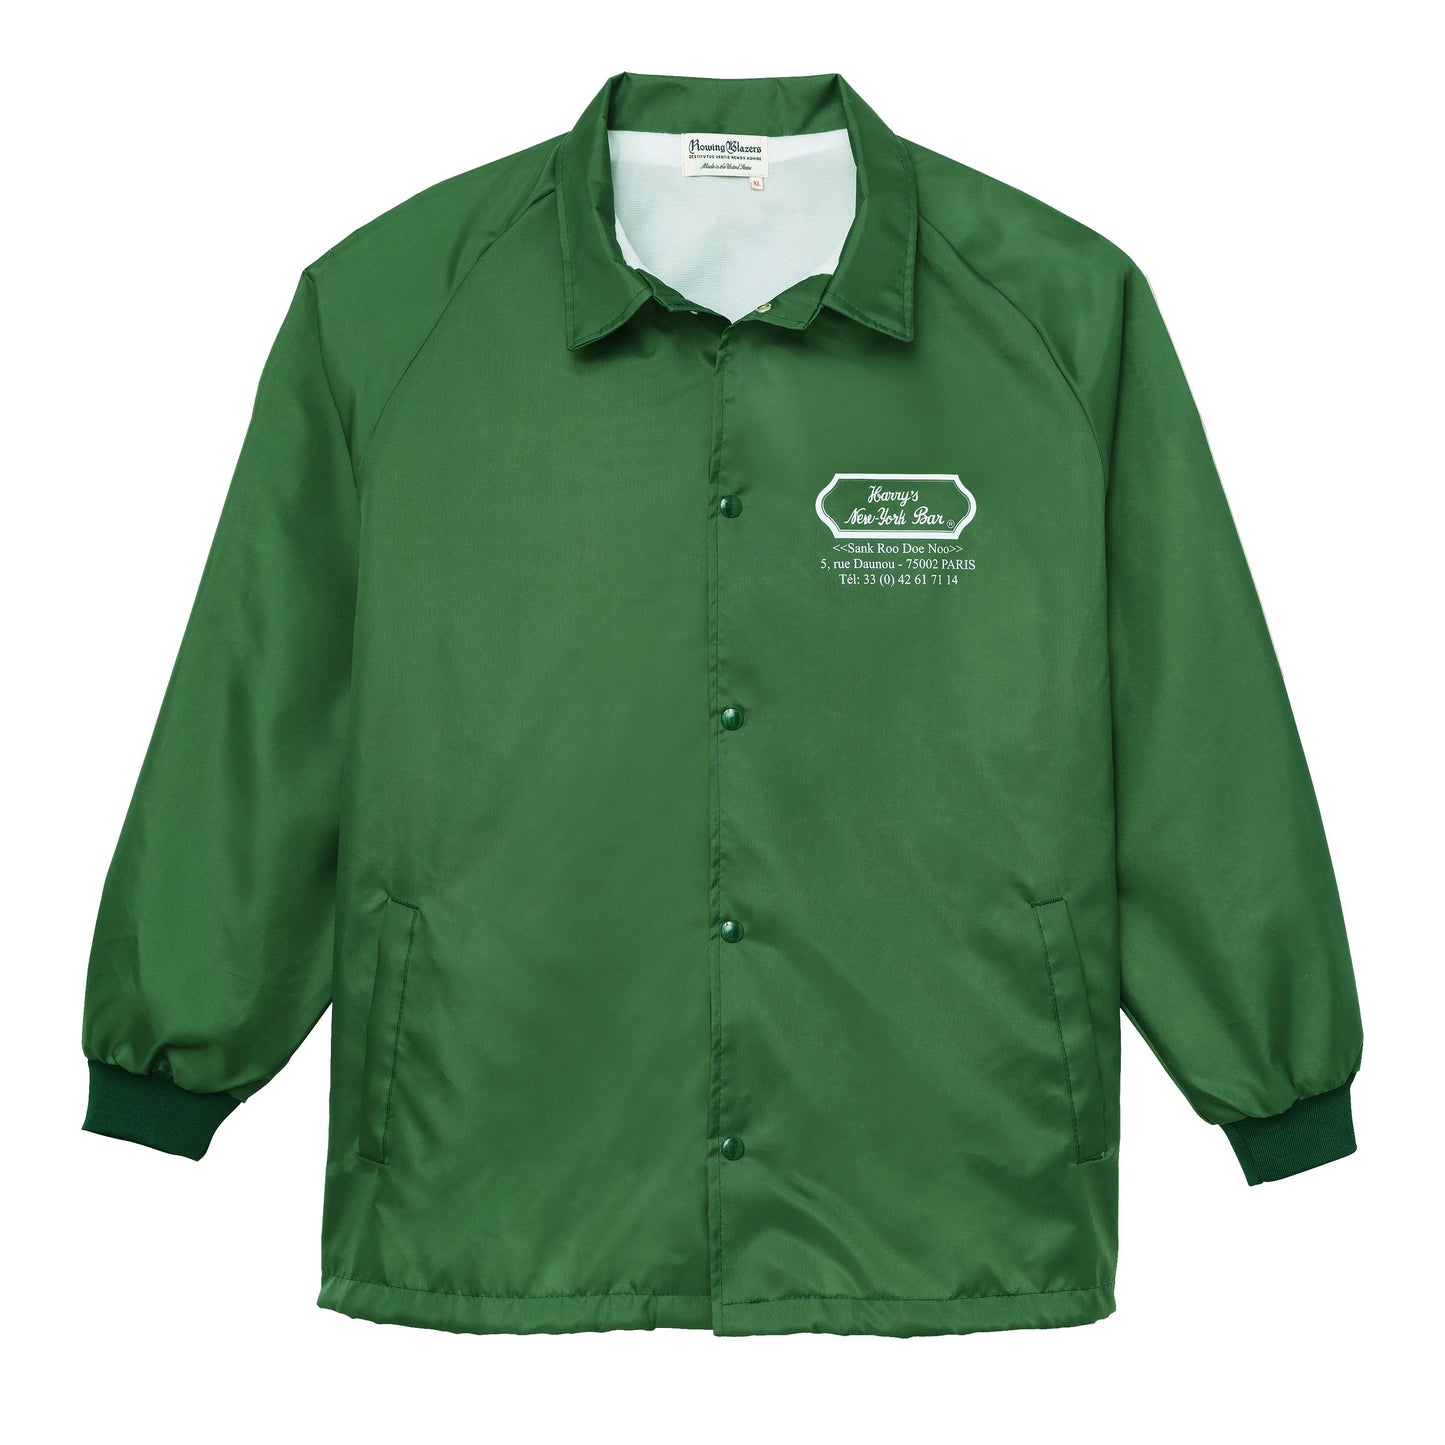 Green nylon coach's jacket emblazoned with Harry's New York Bar address on the front chest.